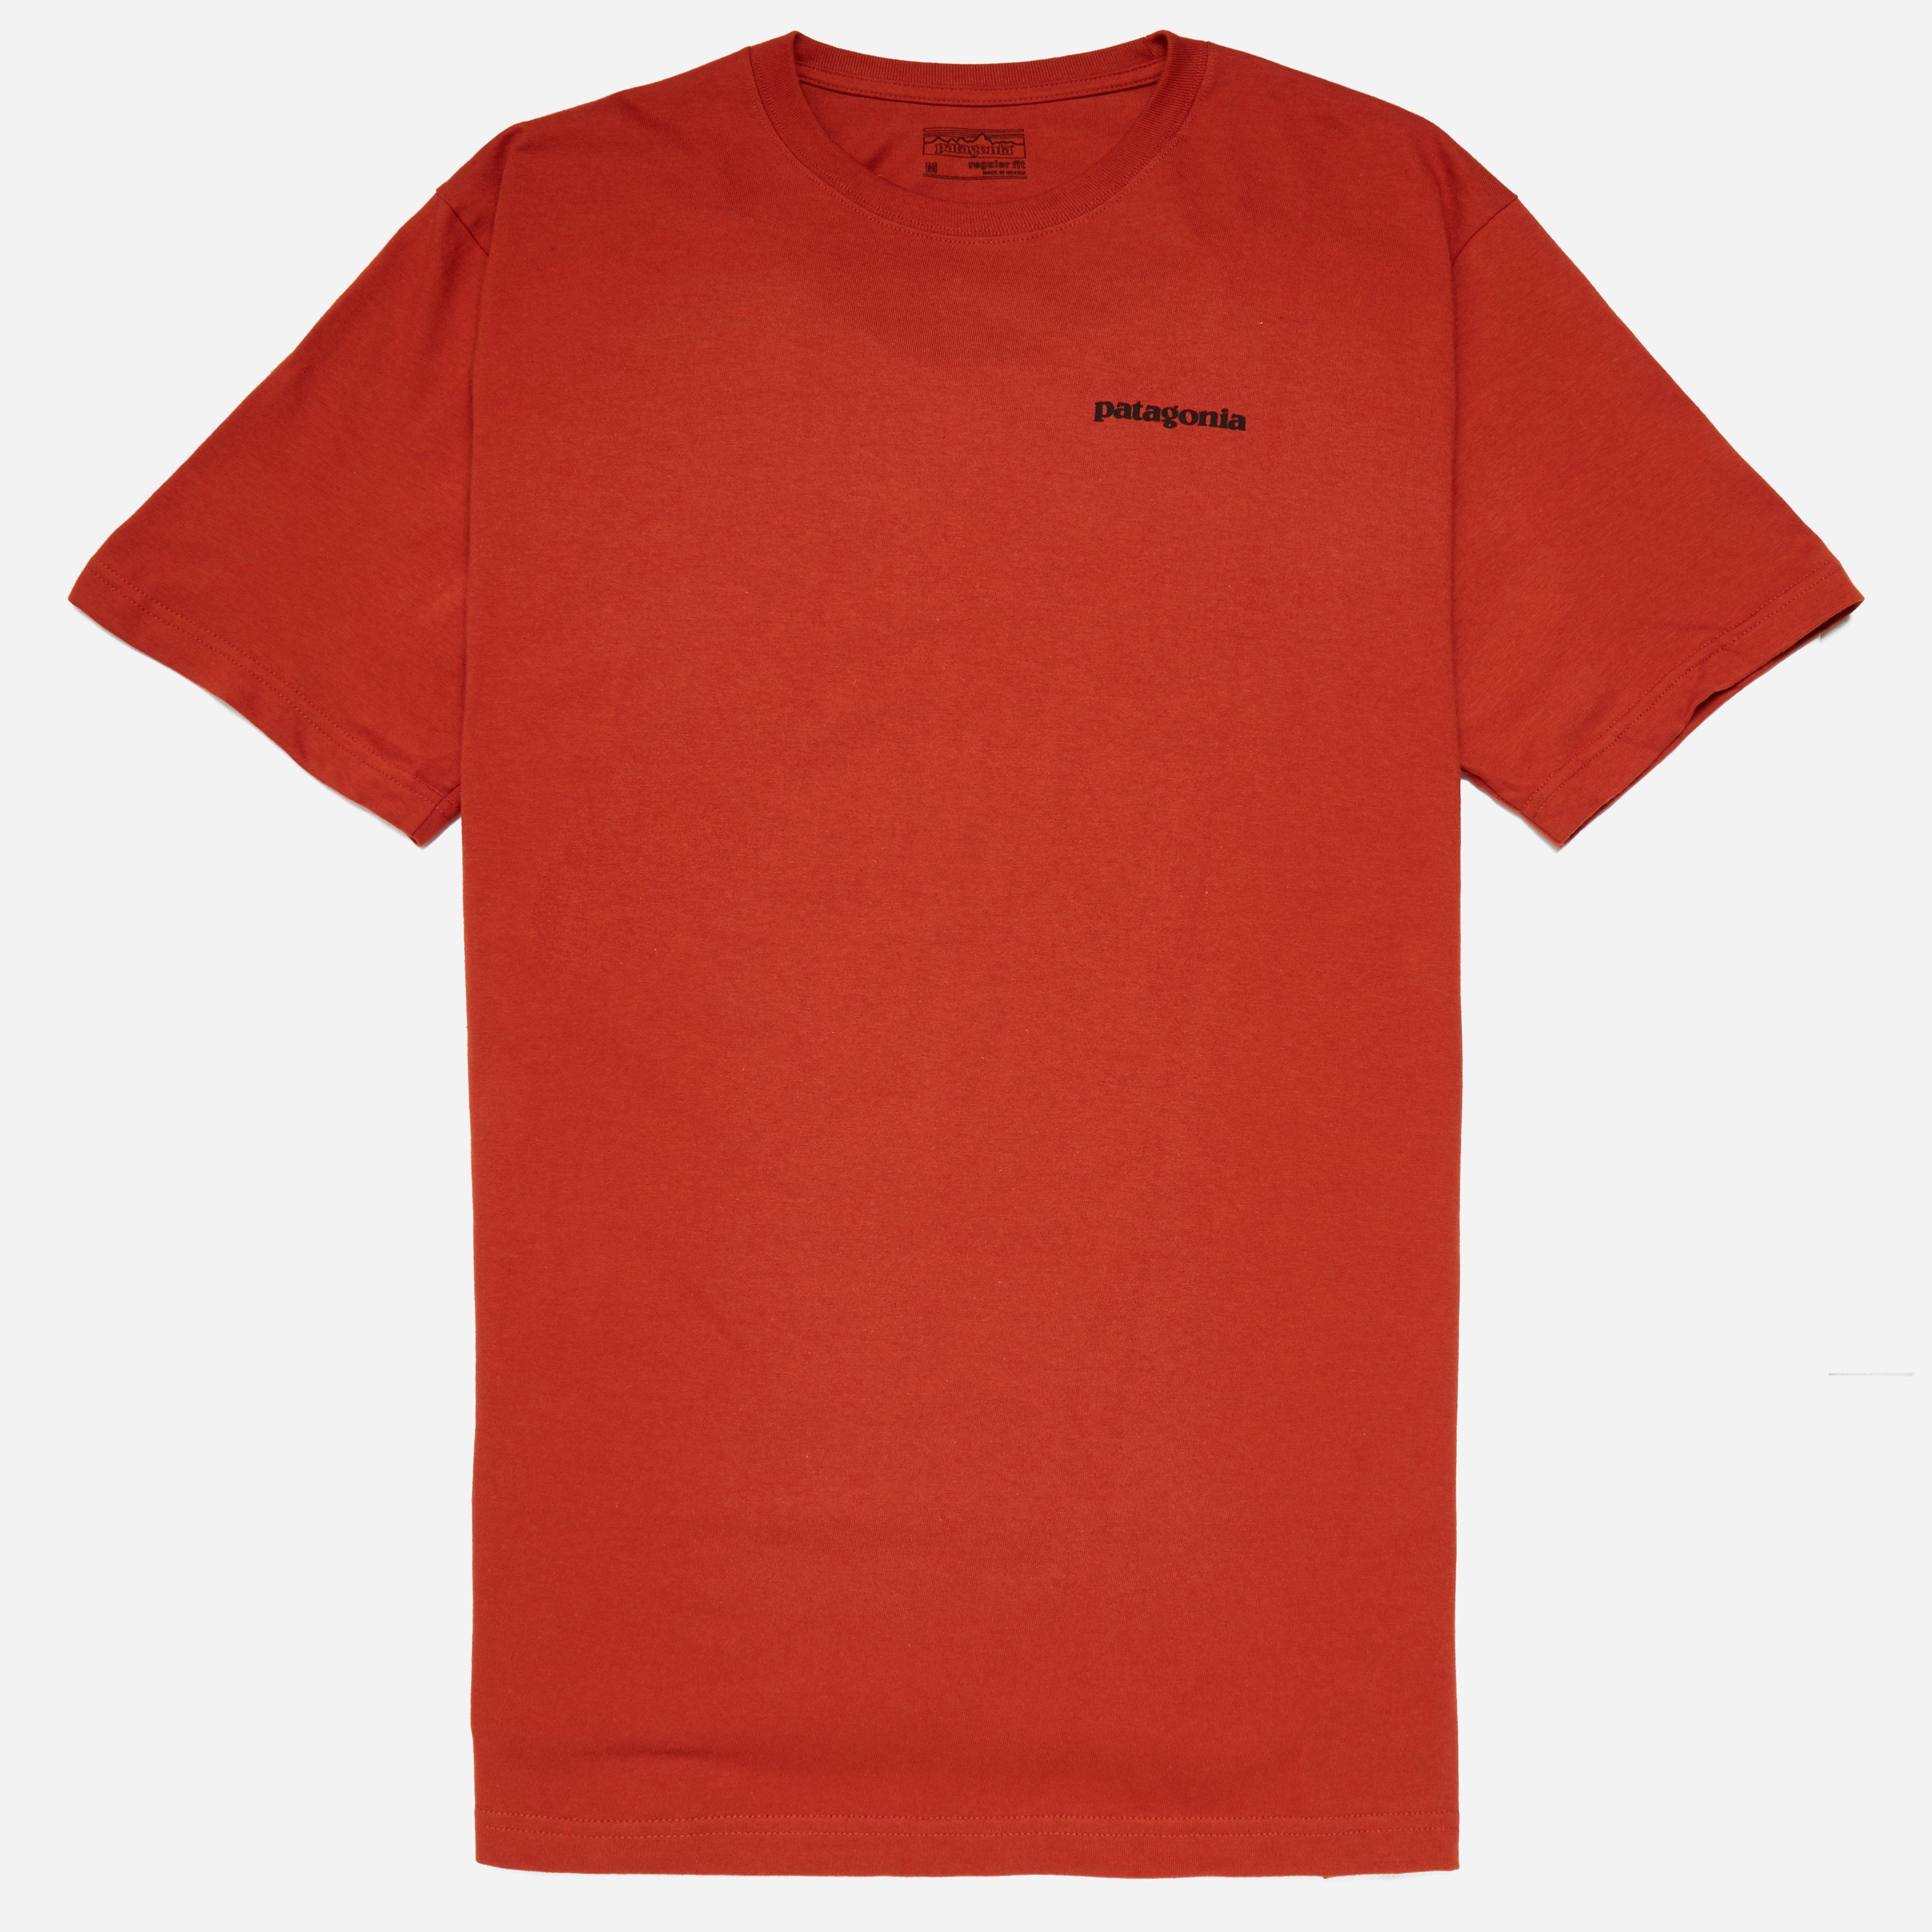 Lyst - Patagonia P-6 Logo Cotton T-shirt in Red for Men